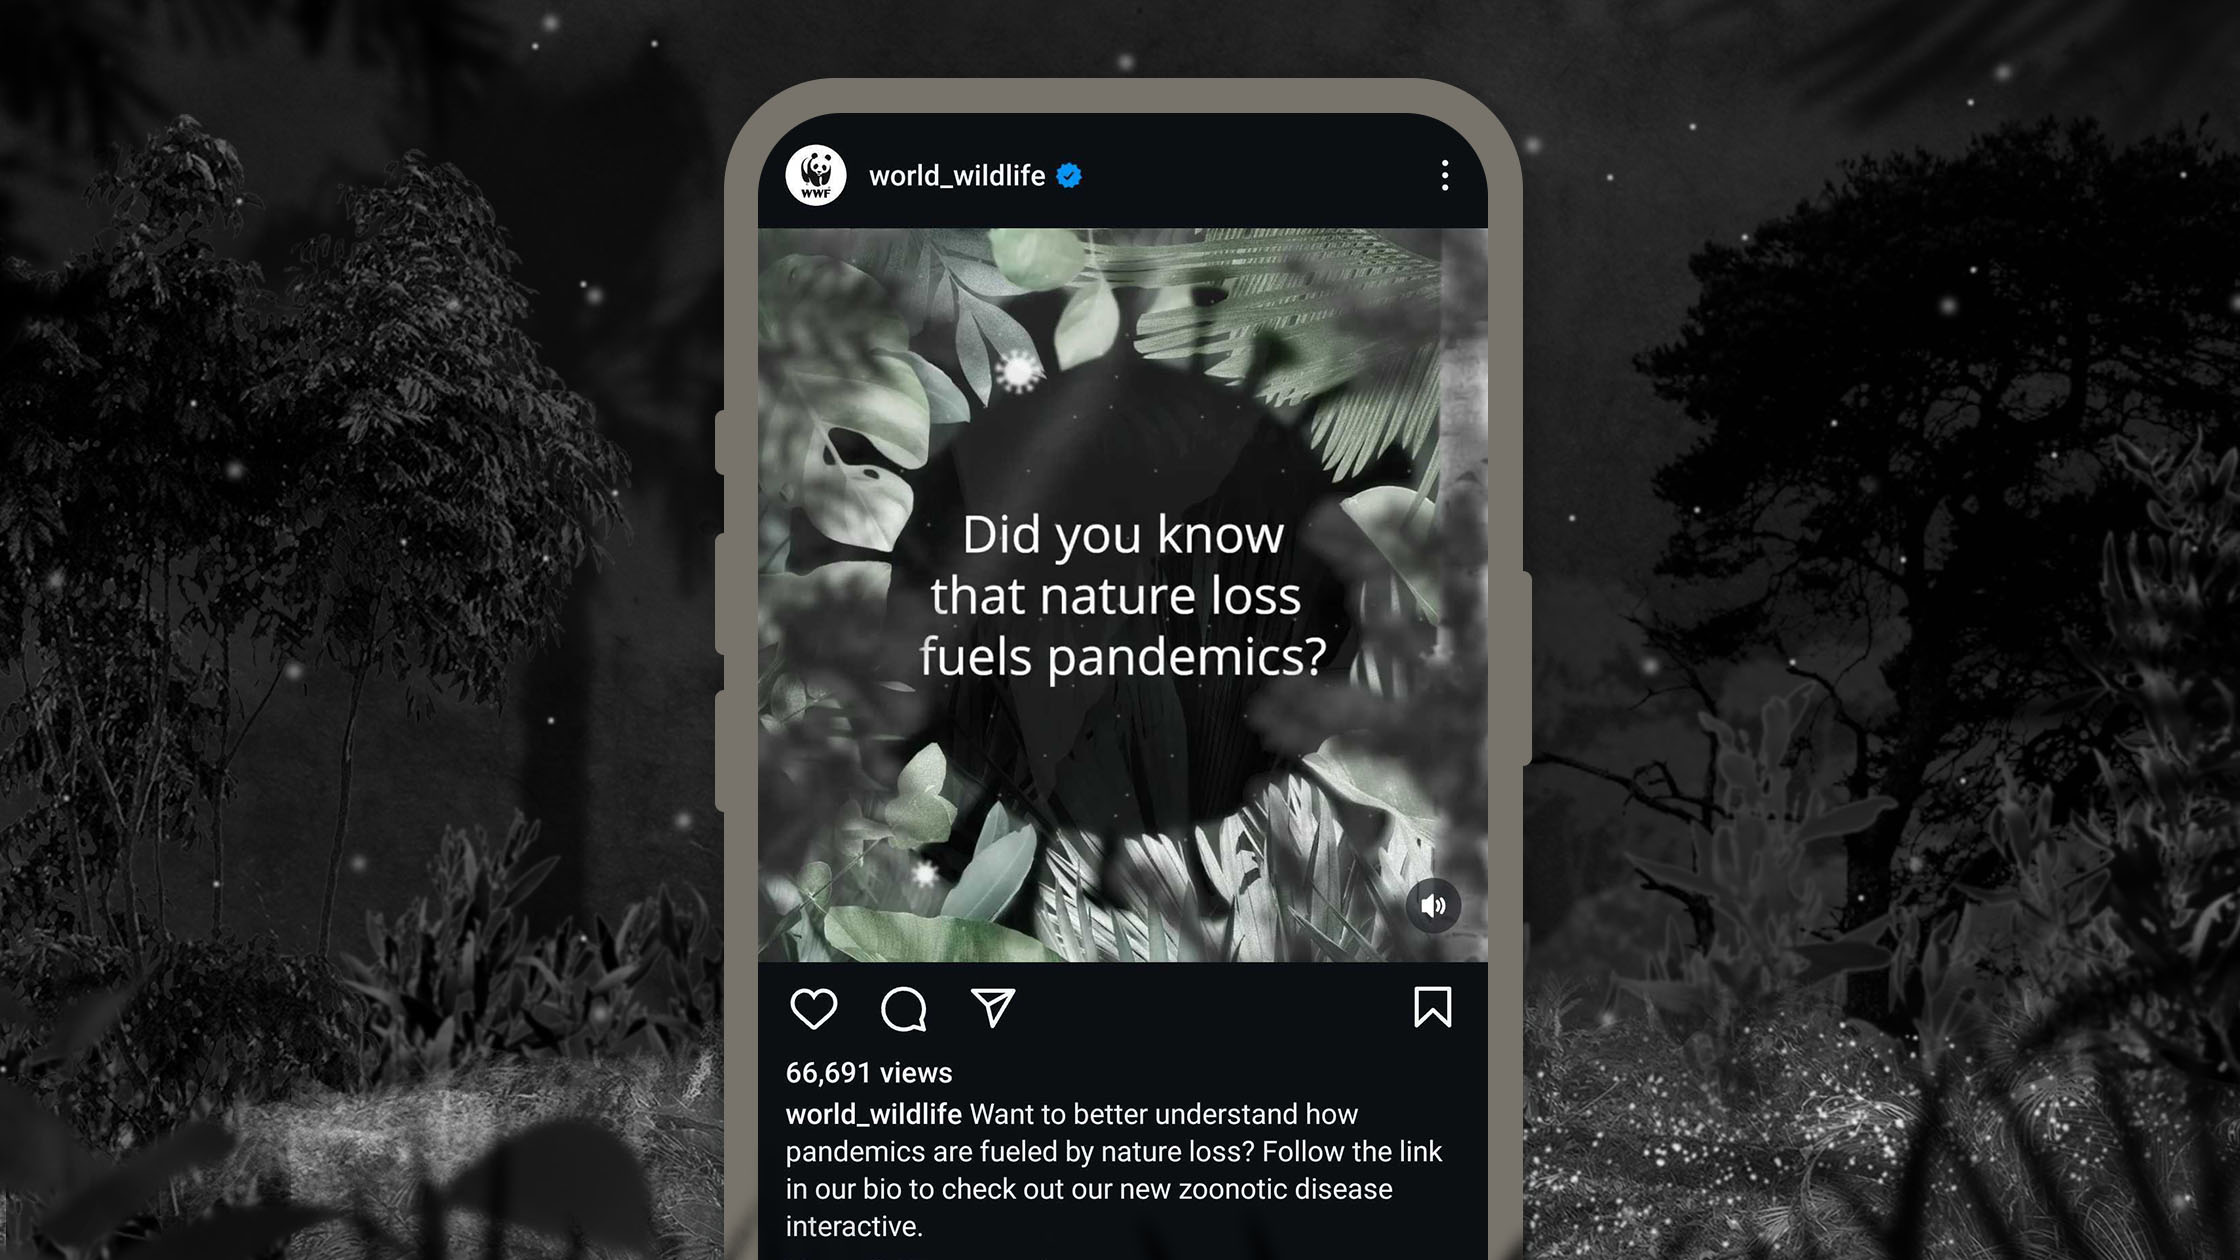 A smartphone screen displays an Instagram post by "world_wildlife." It features an image of dense foliage with the text overlay: "Did you know that nature loss fuels pandemics?" The caption encourages viewers to learn more about the connection between nature loss and diseases.